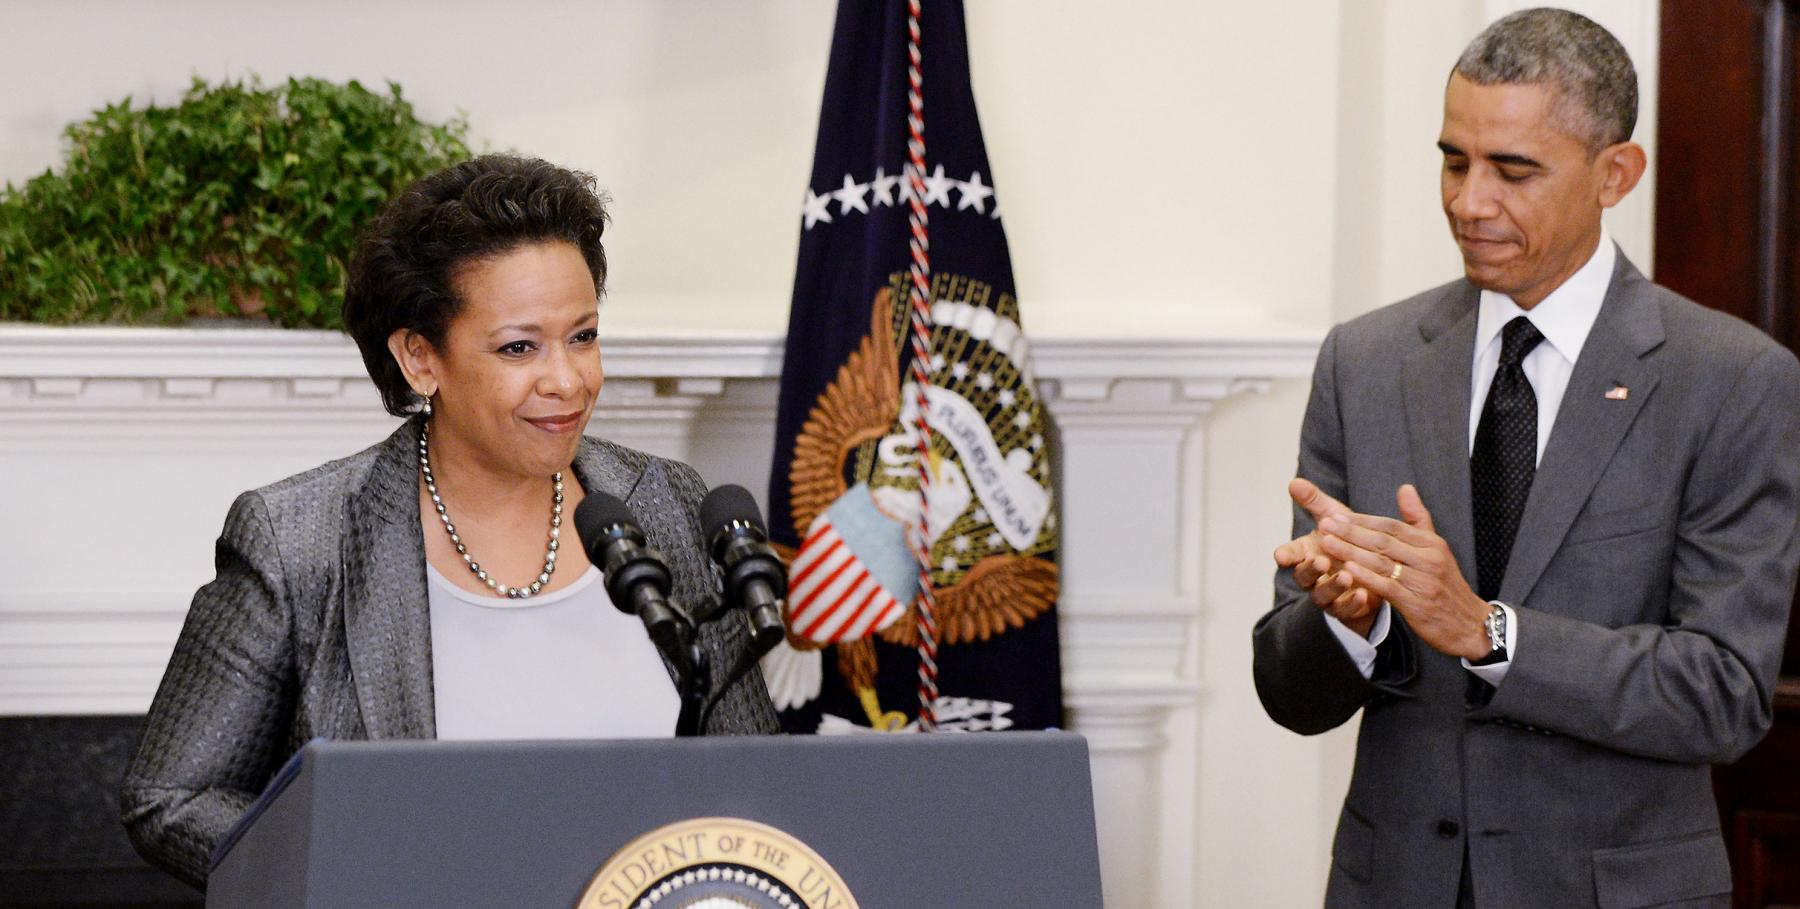 Why doesn’t Loretta Lynch ‘guarantee’ the civil rights of Trump supporters?